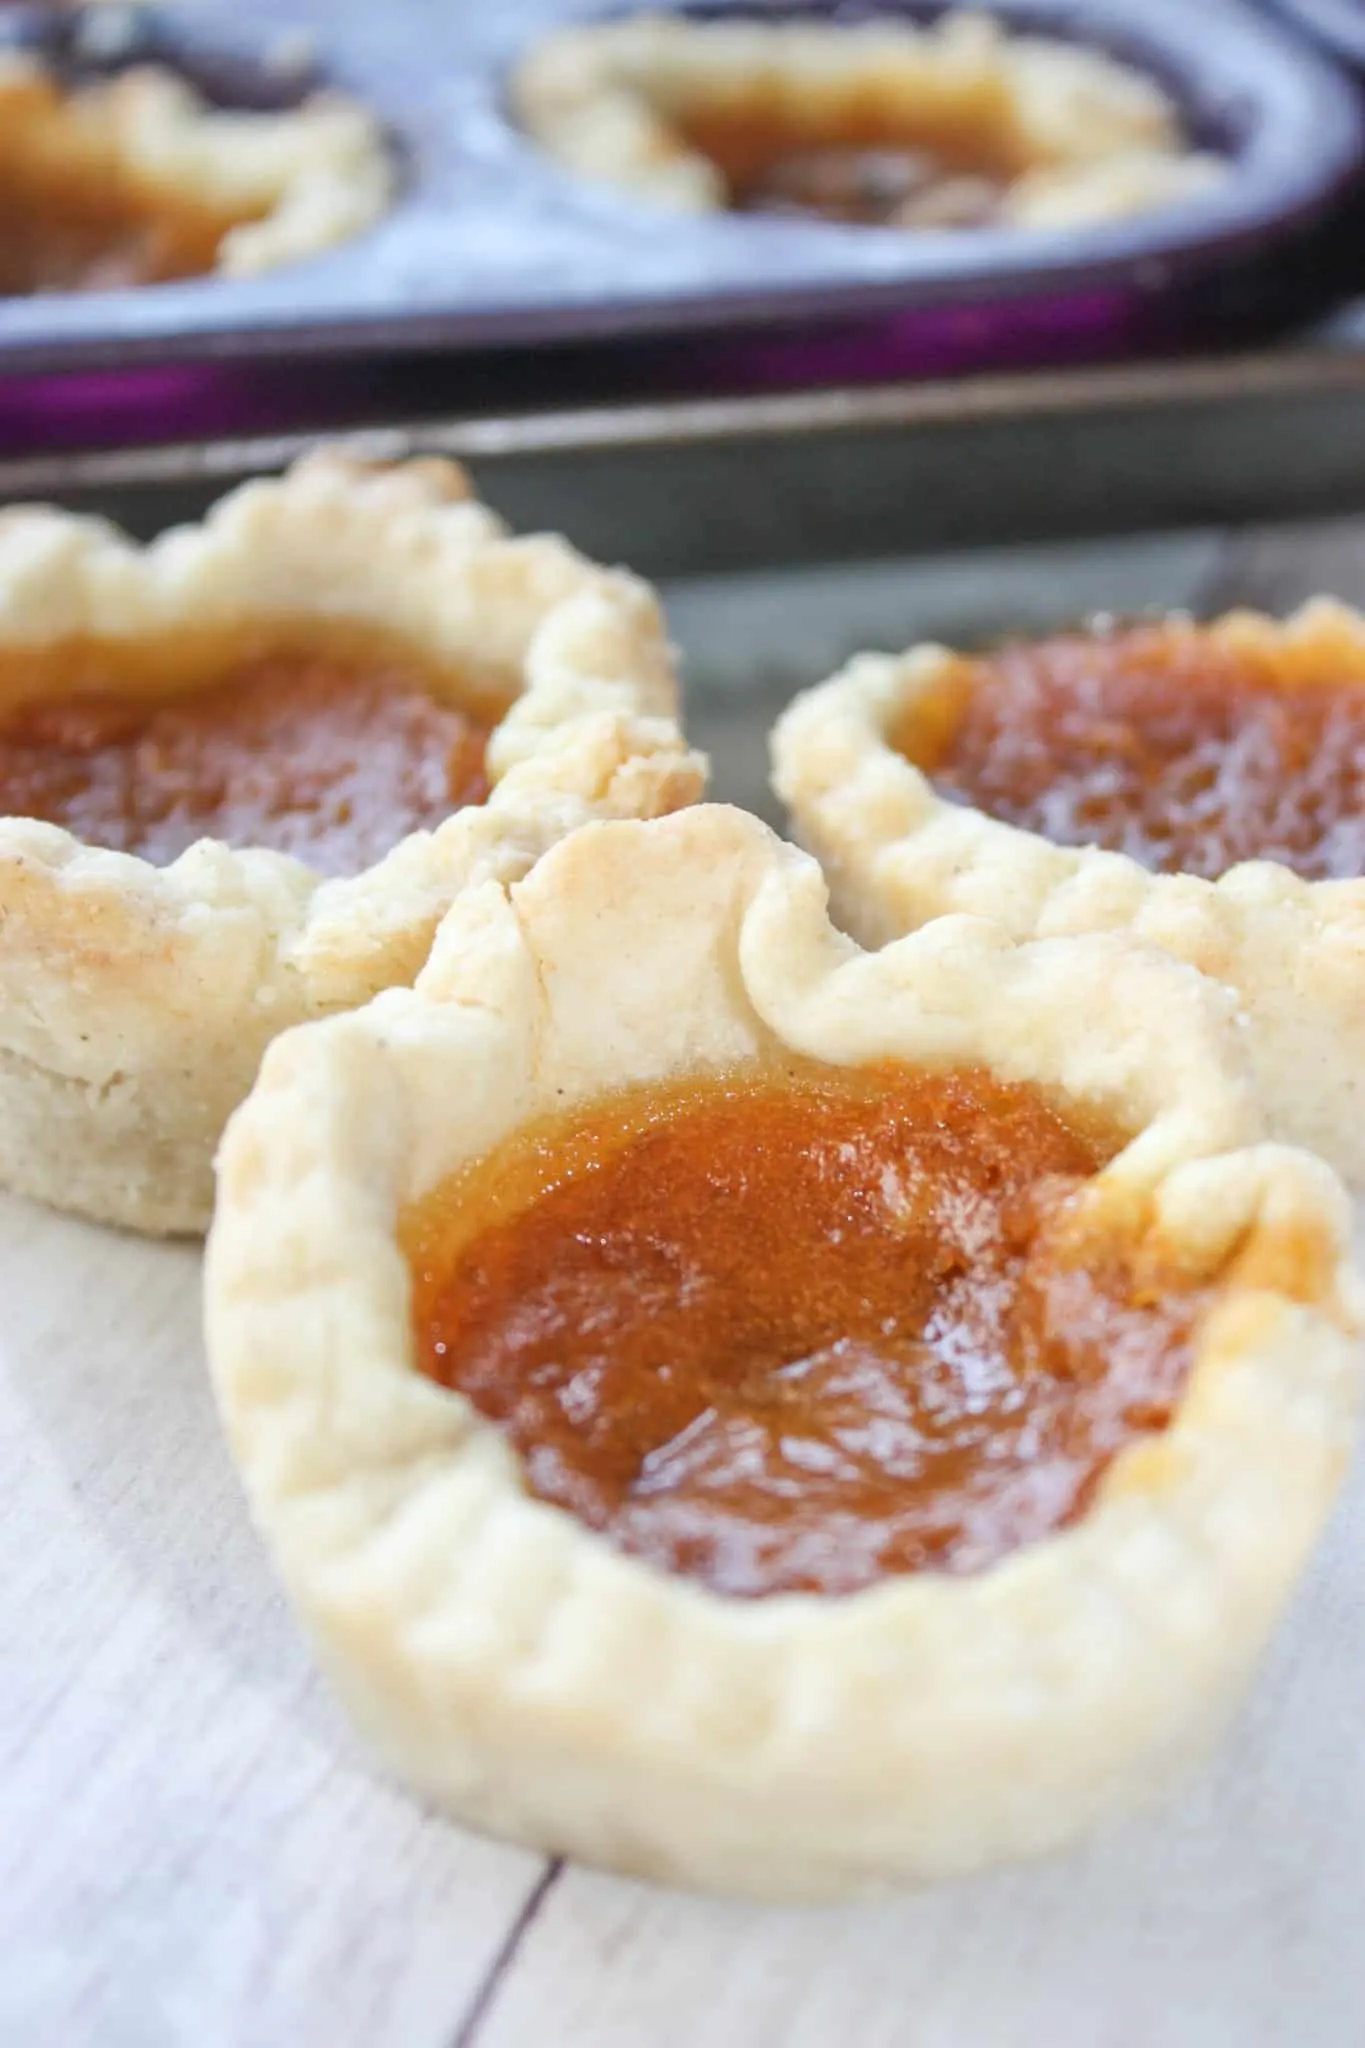 Pumpkin Butter Tarts are a seasonal twist on traditonal butter tarts.  These gluten free tarts will be a tasty addition to any fall menu.